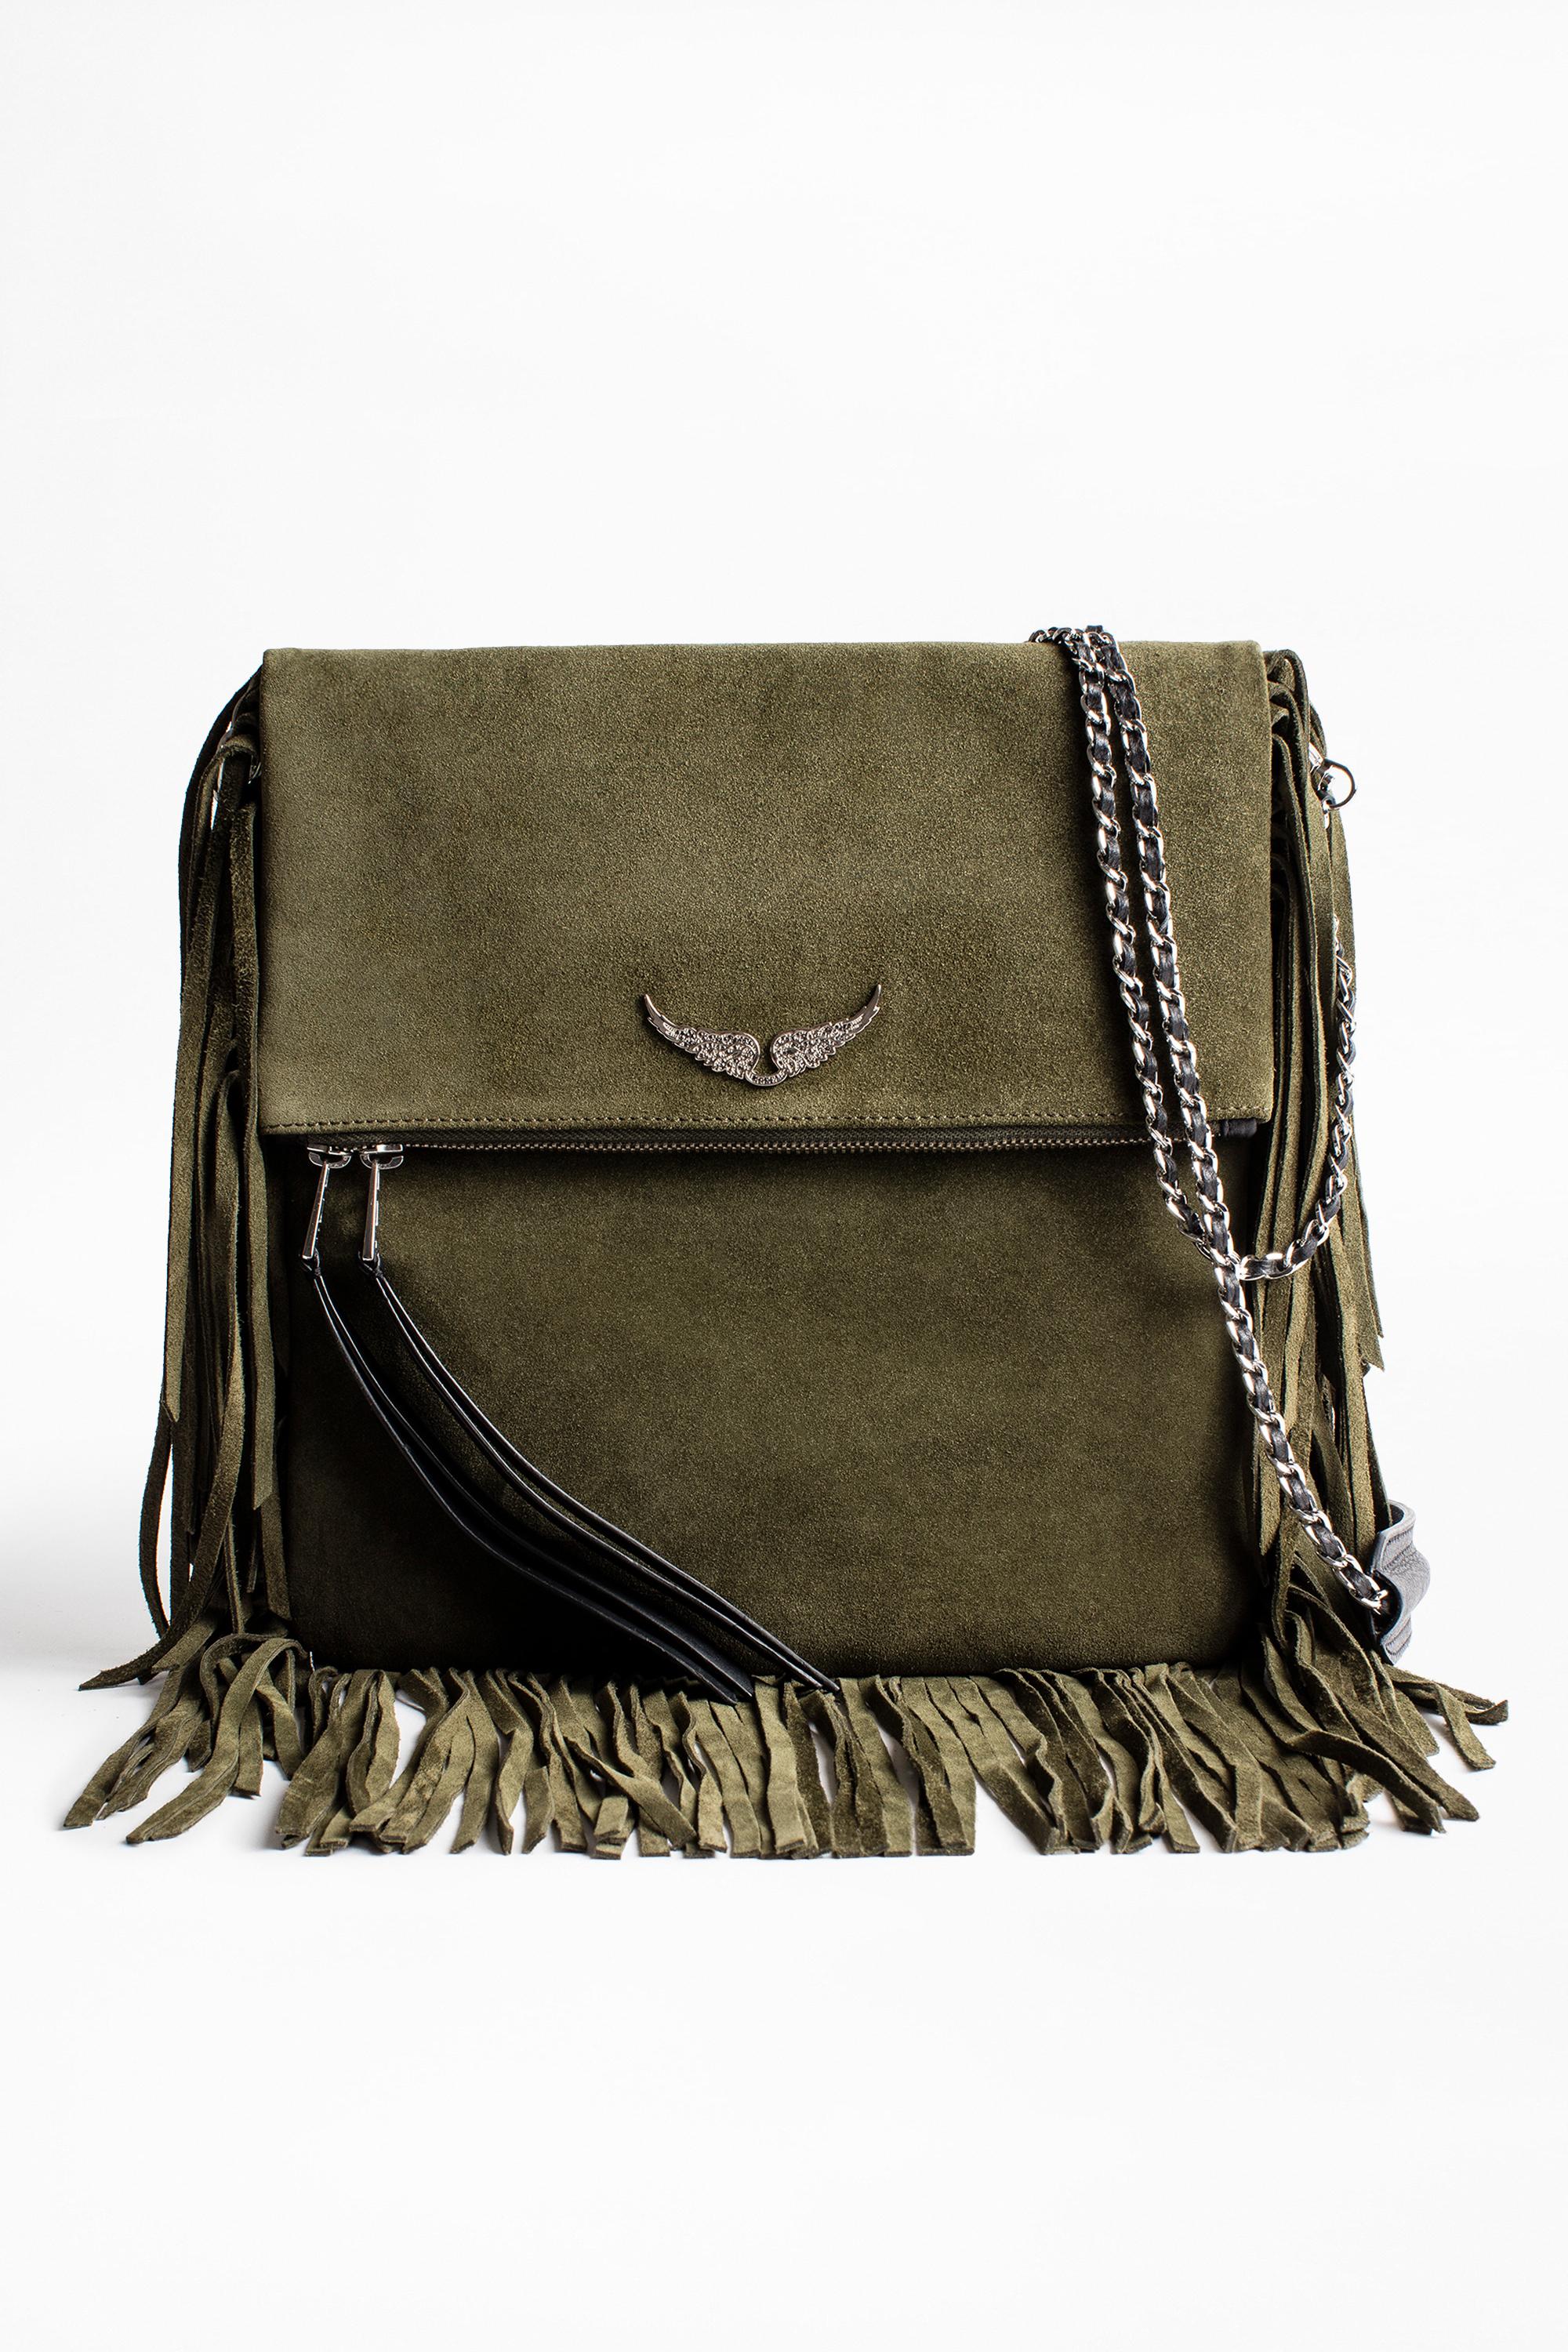 Zadig & Voltaire Rockson Fringes Clutch in Green - Lyst